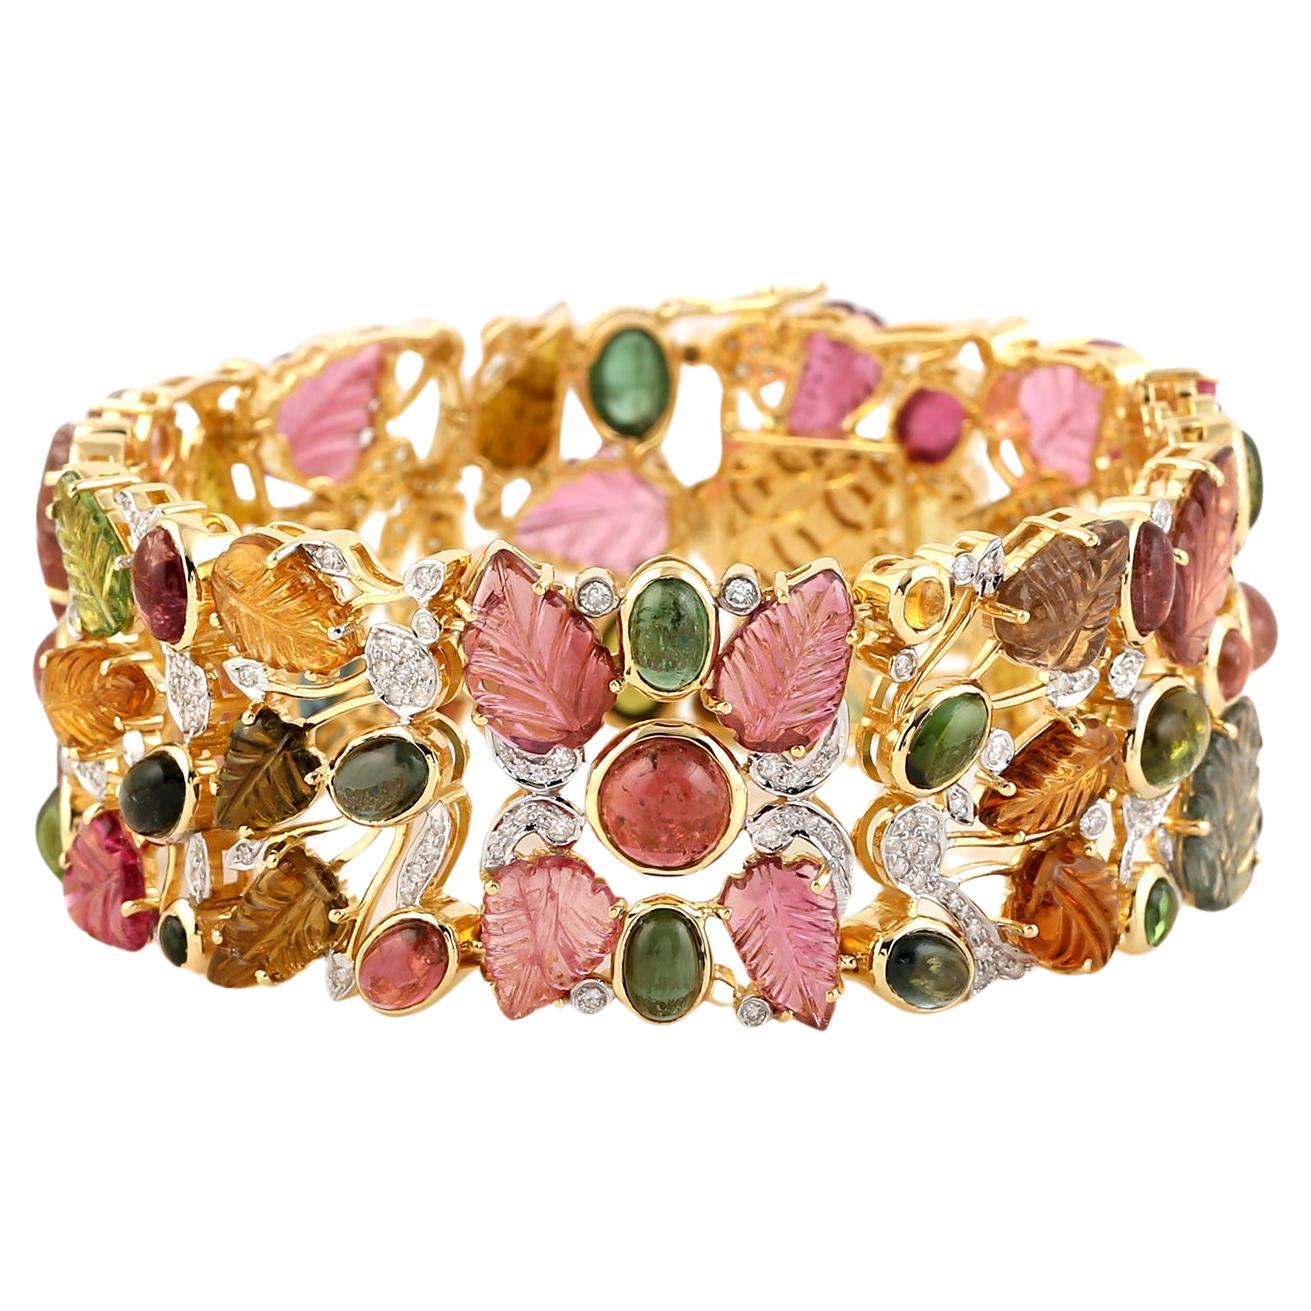 Multi Color Tourmaline Bracelet With Diamonds Made In 18k Yellow Gold For Sale